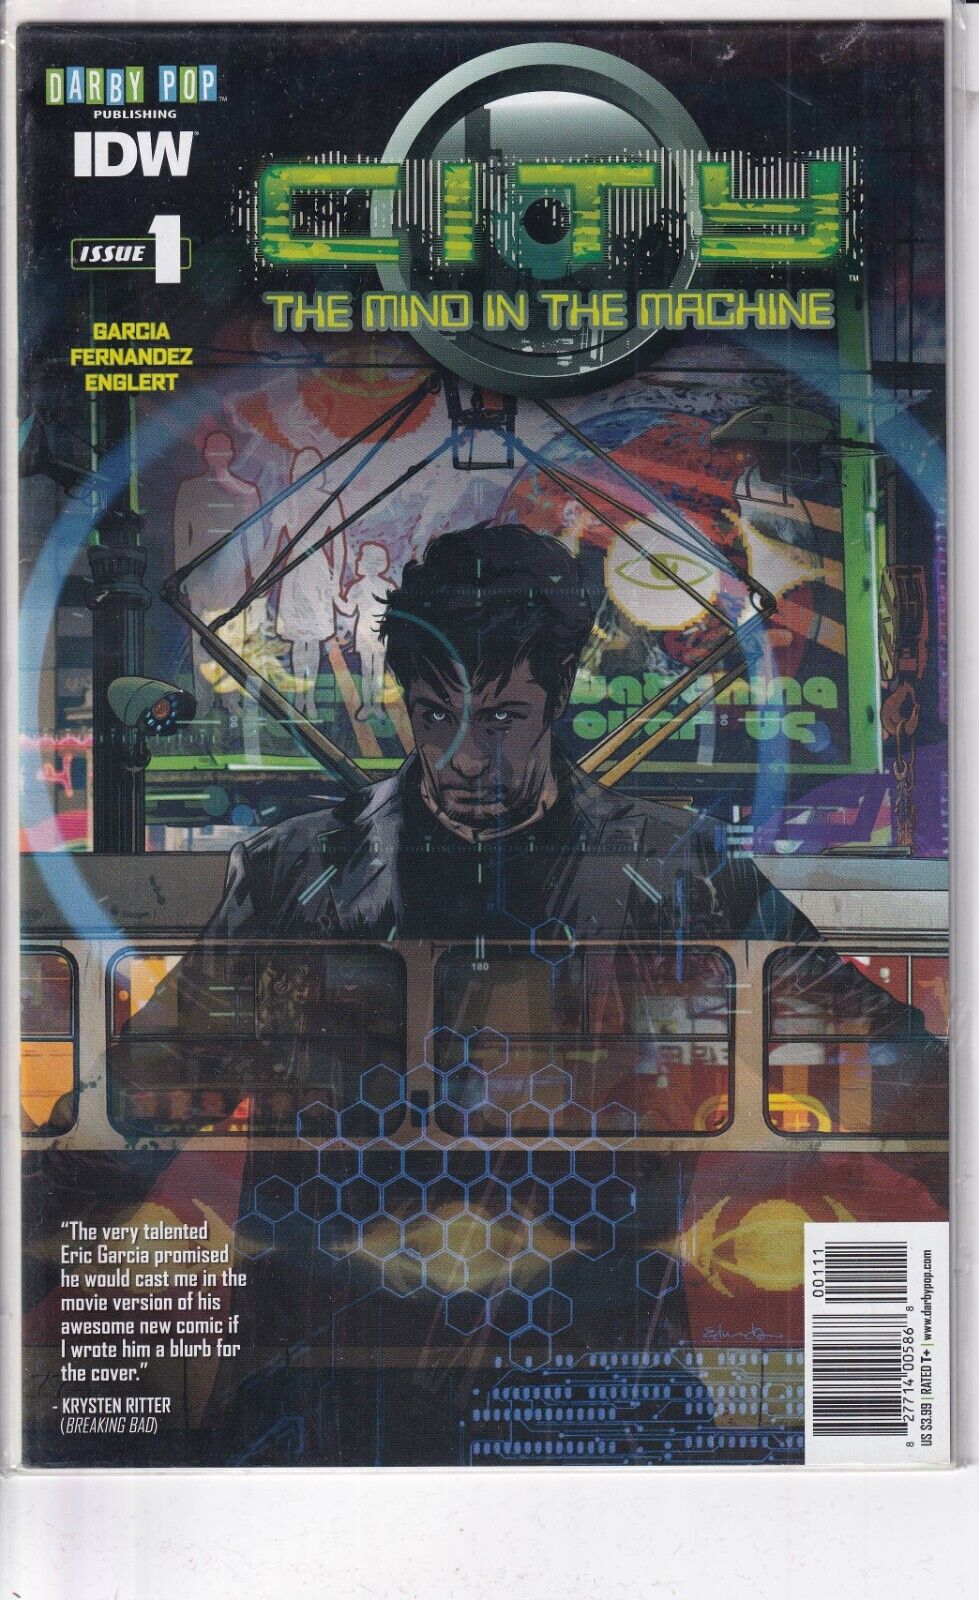 37930: IDW CITY: THE MIND IN THE MACHINE #1 VF Grade